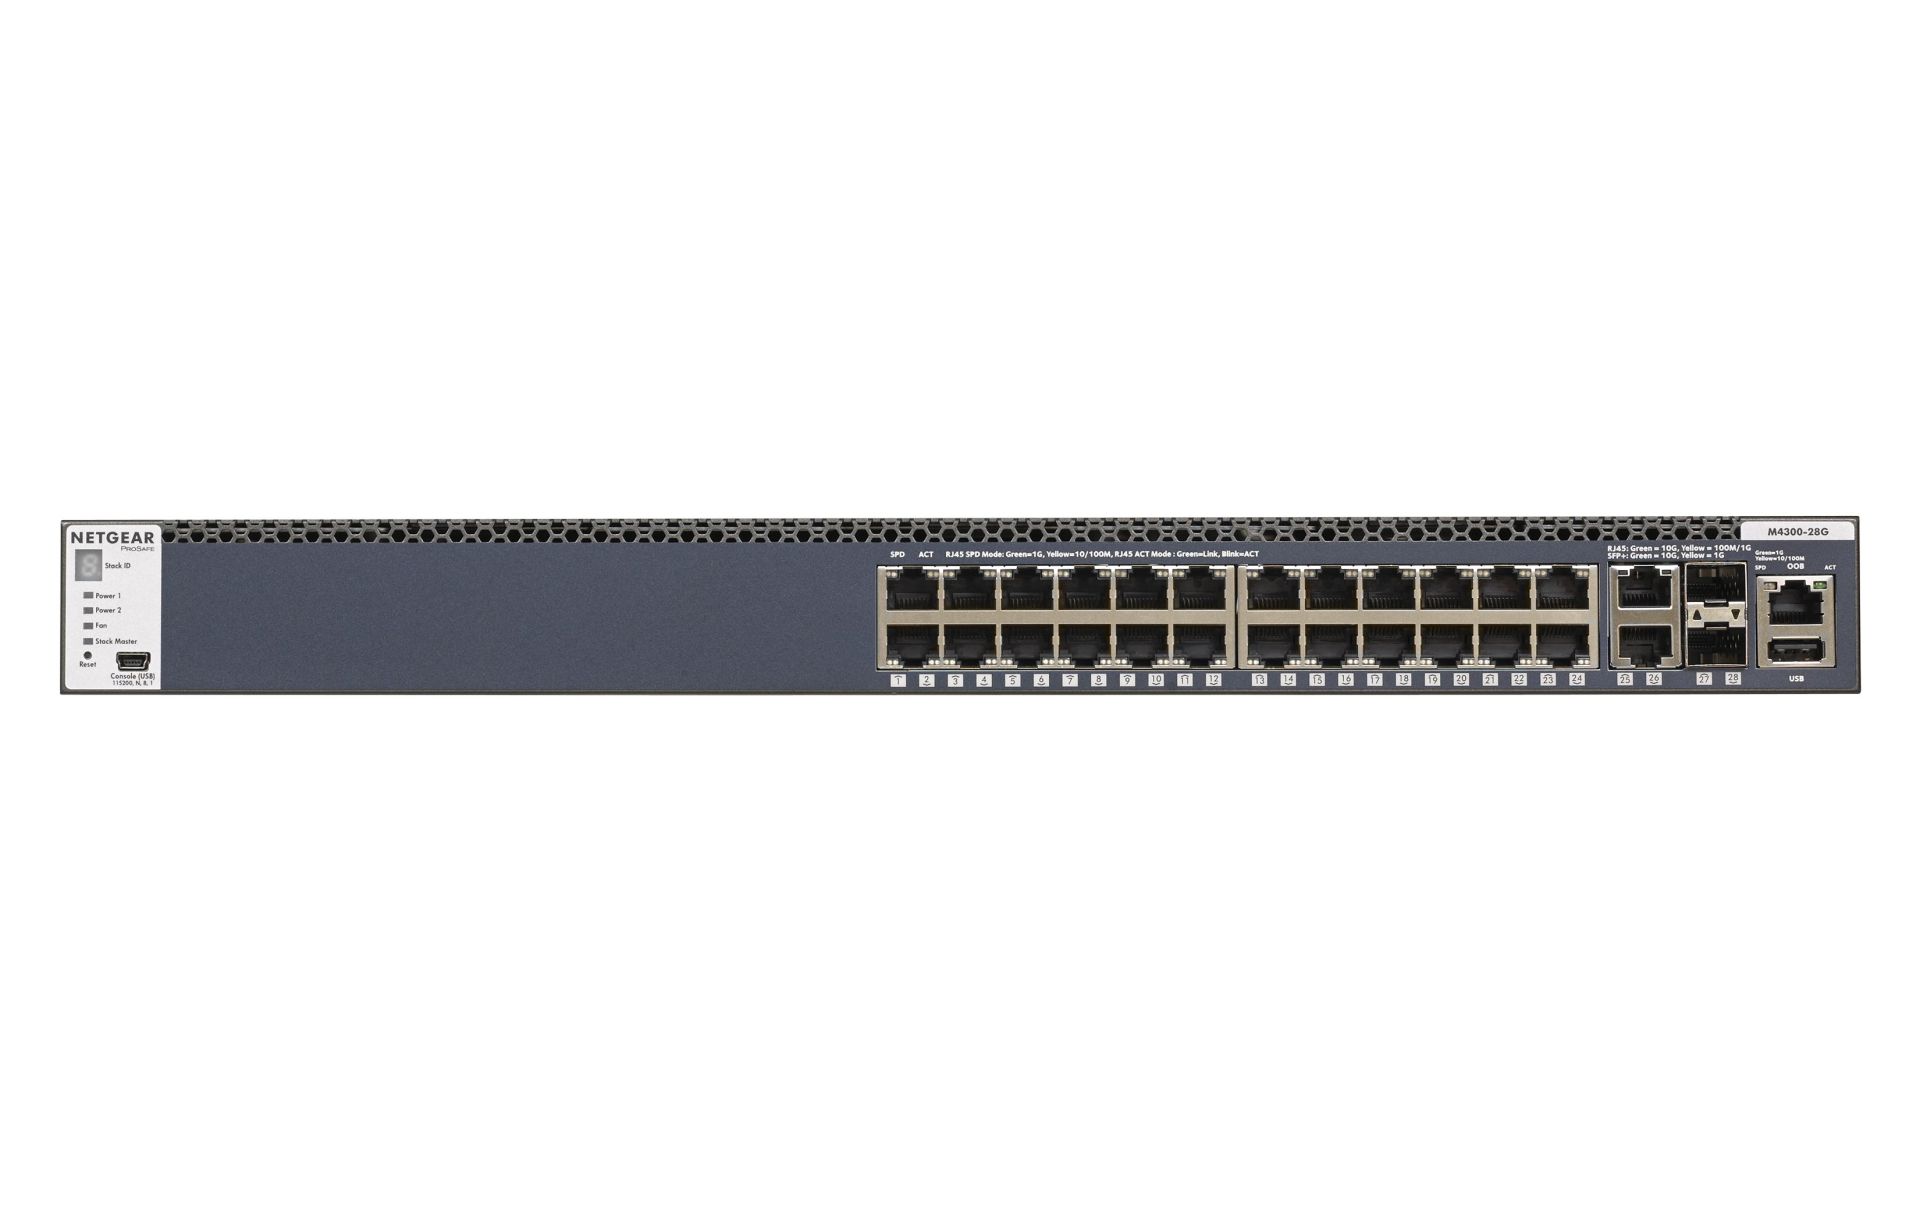 Netgear 24x1G, 2x10G, and 2xSFP+ Managed Switch